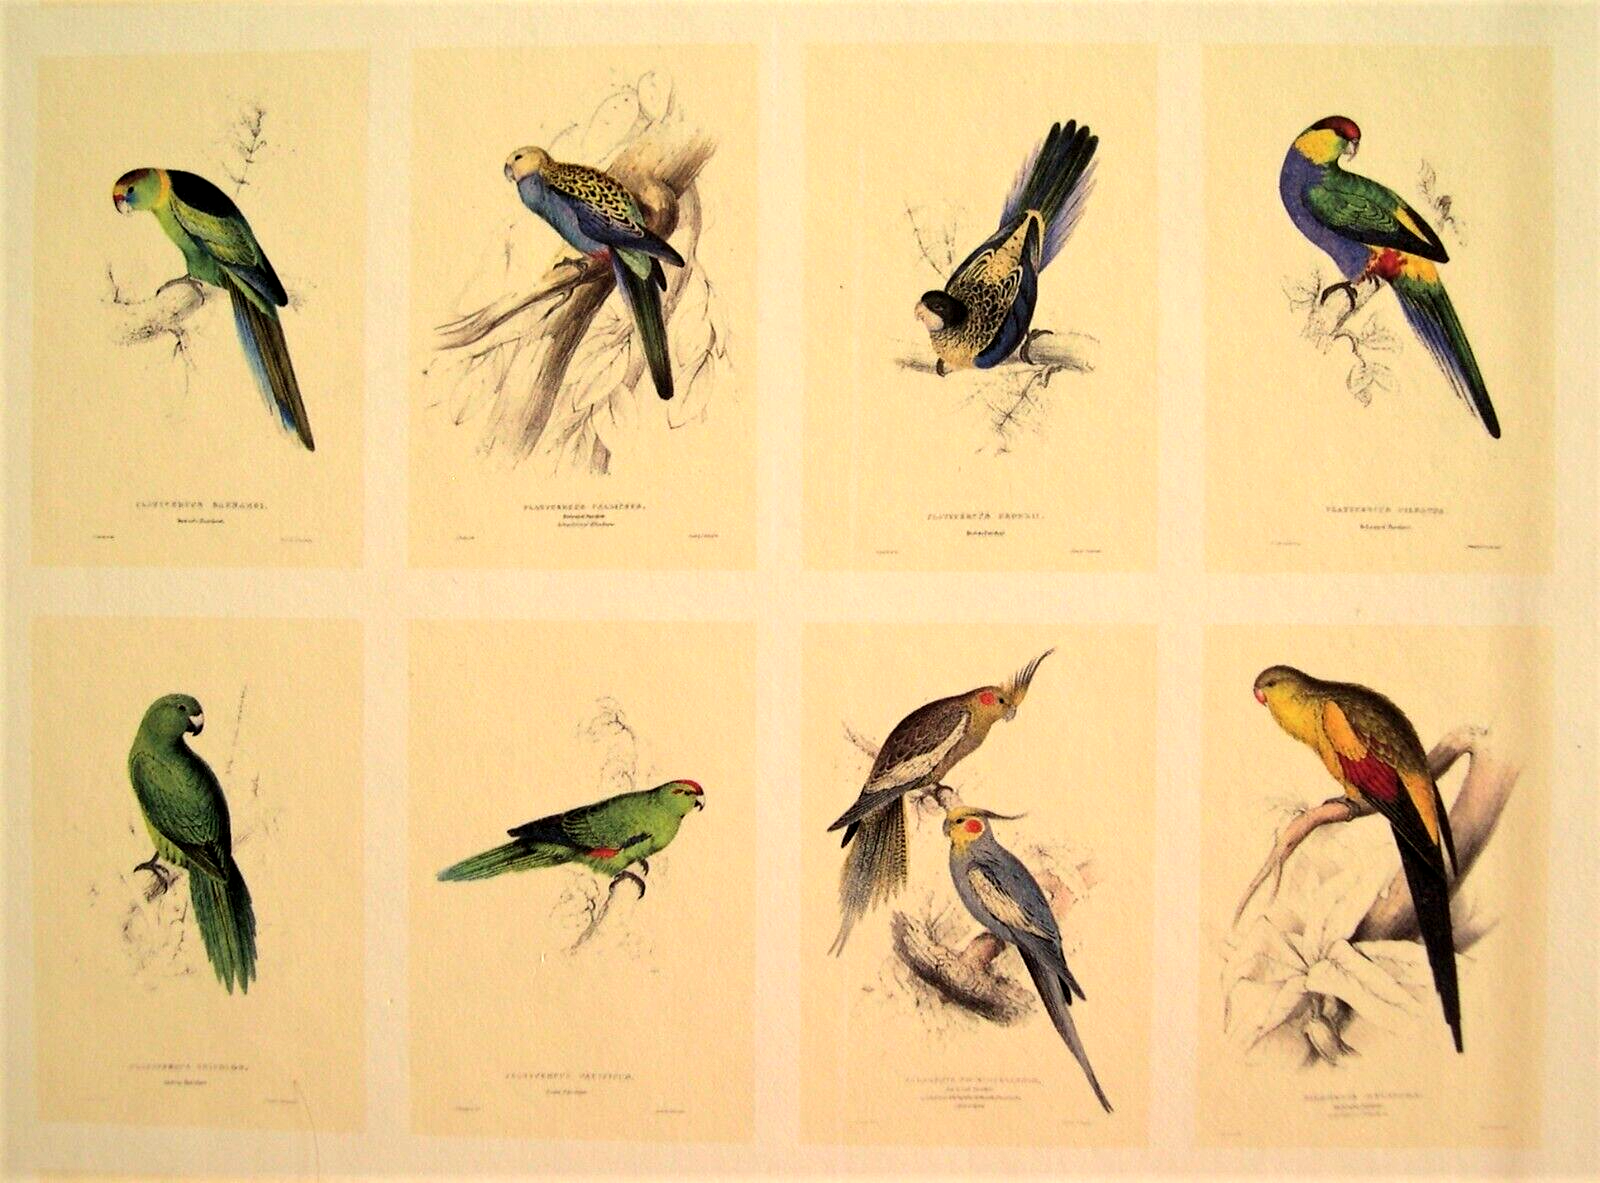 42 Lear Parrot Prints; The Complete Set Directly From His Original 1832 Folio Без бренда - фотография #4